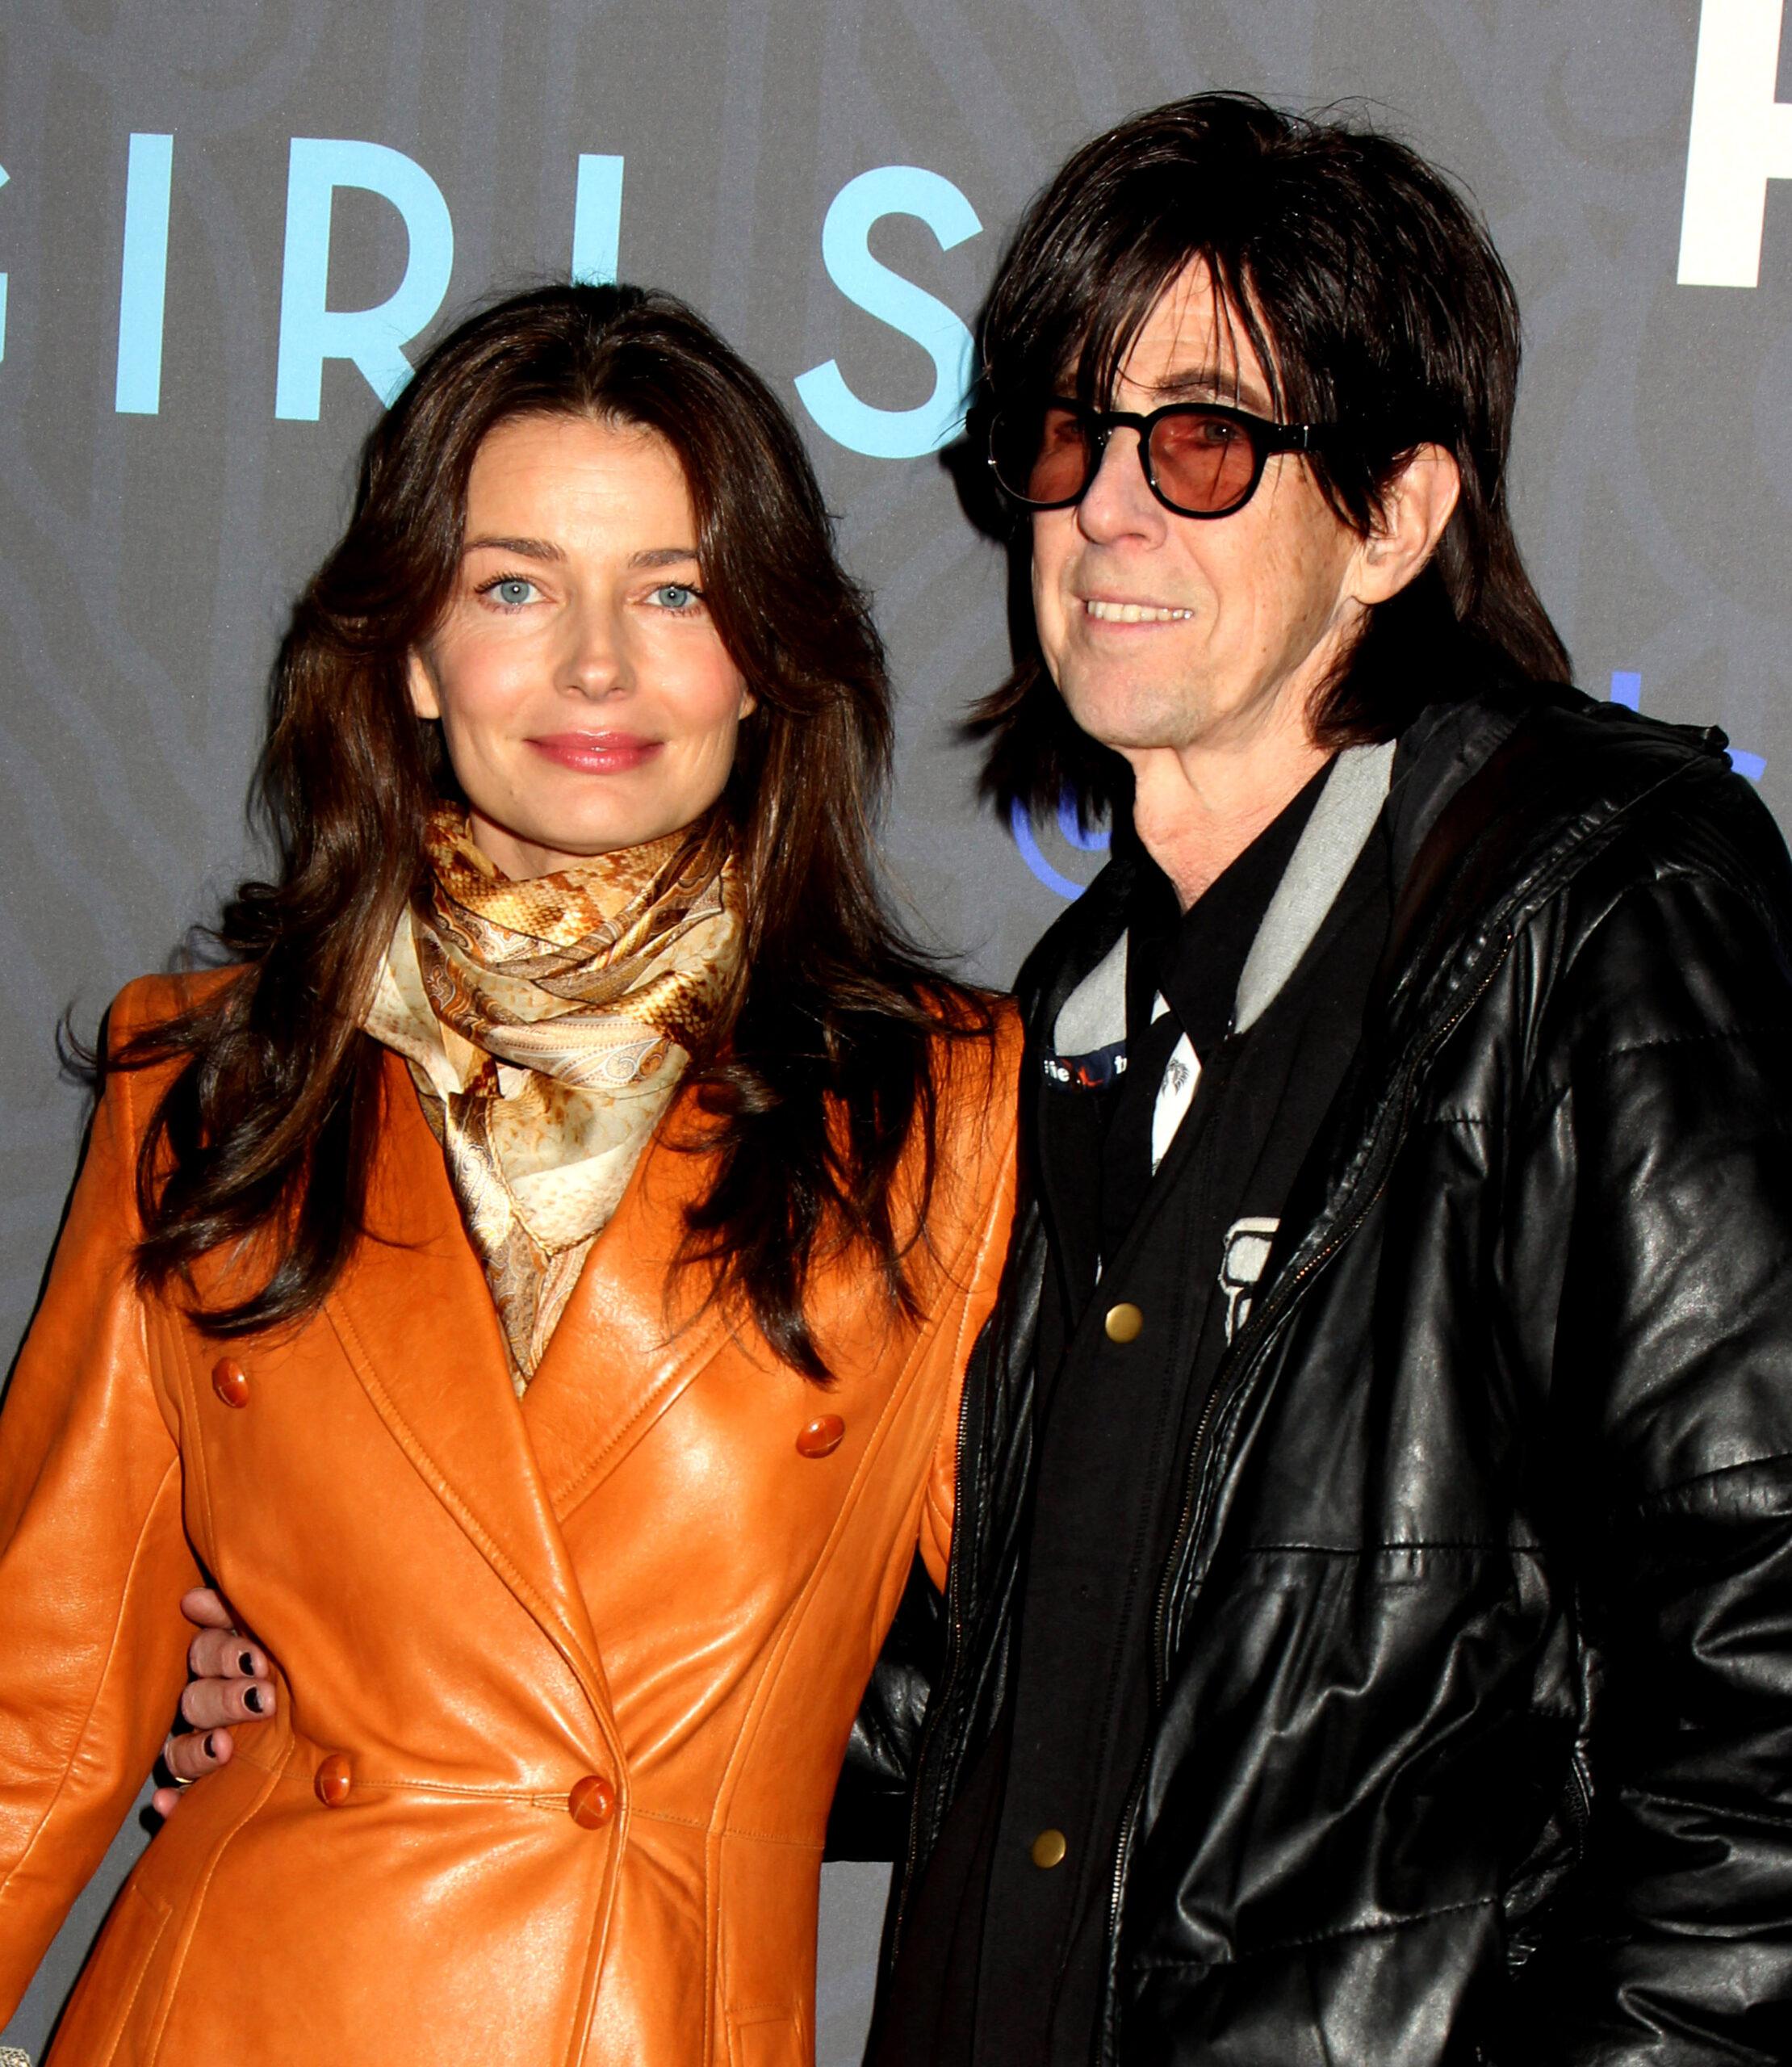 Ric Ocasek lead singer of The Cars has died at the age of 70 after being found unresponsive by estranged wife Paulina Porizkova in his Manhattan townhouse. 